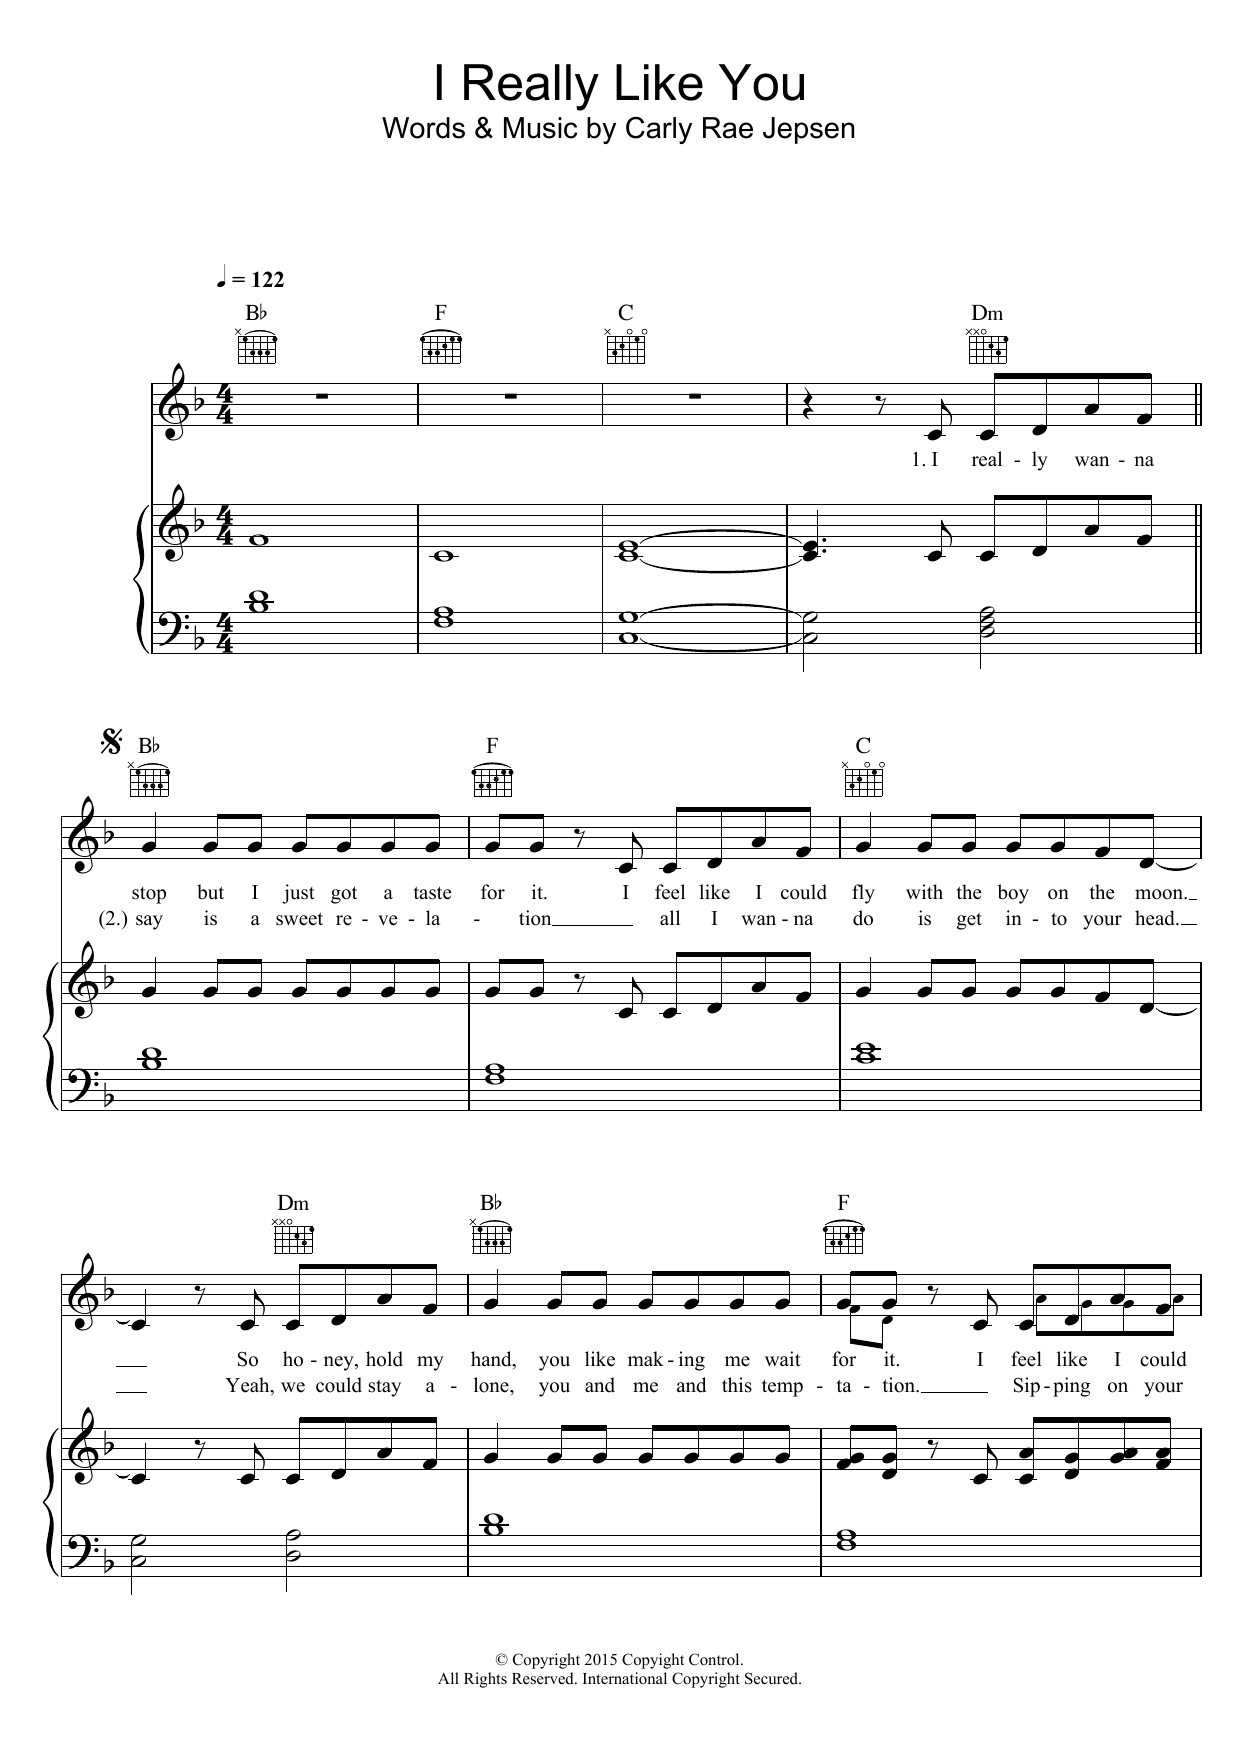 Carly Rae Jepsen I Really Like You sheet music notes and chords. Download Printable PDF.